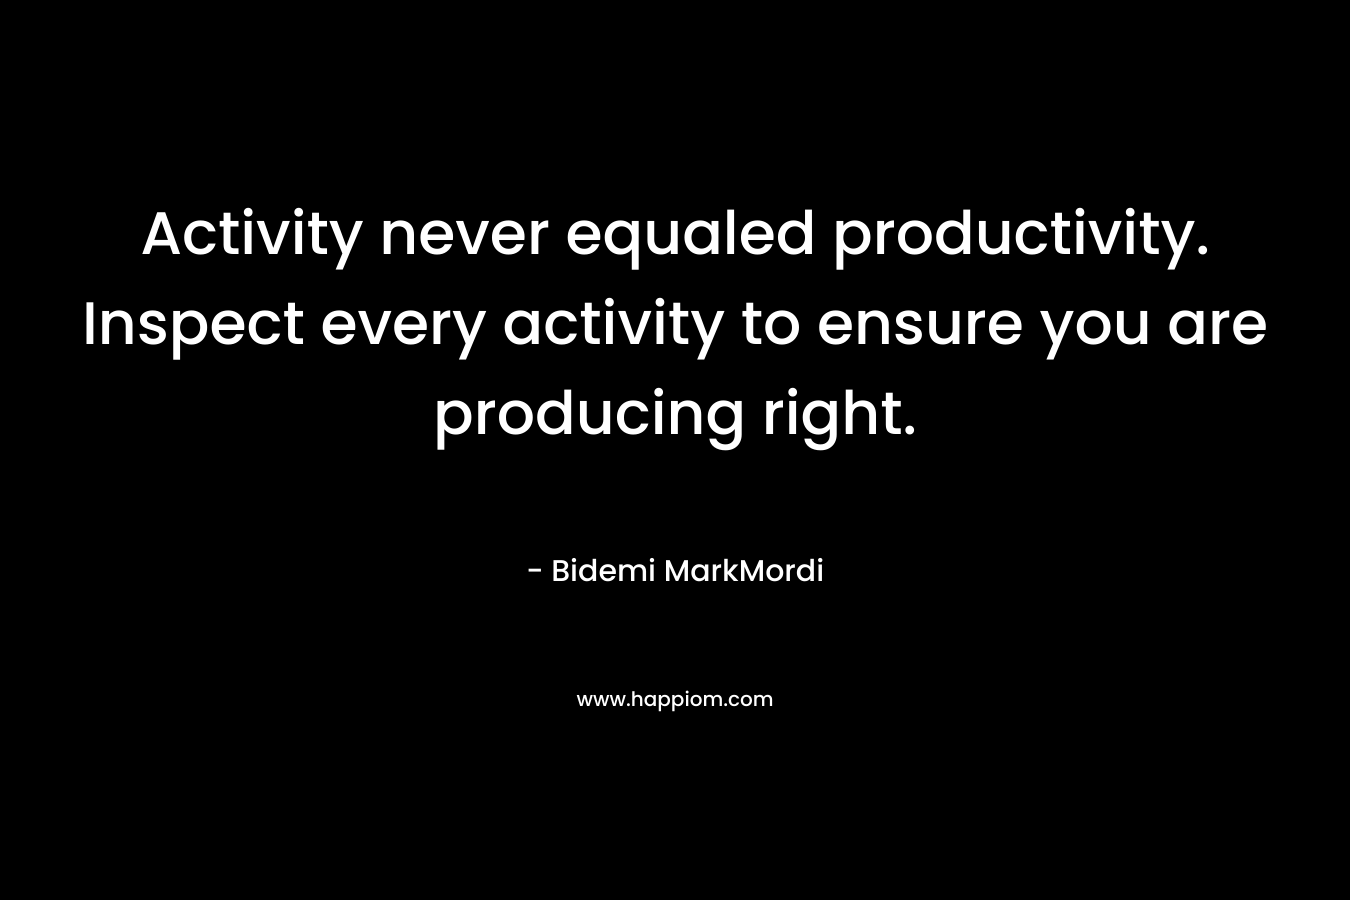 Activity never equaled productivity. Inspect every activity to ensure you are producing right. – Bidemi MarkMordi